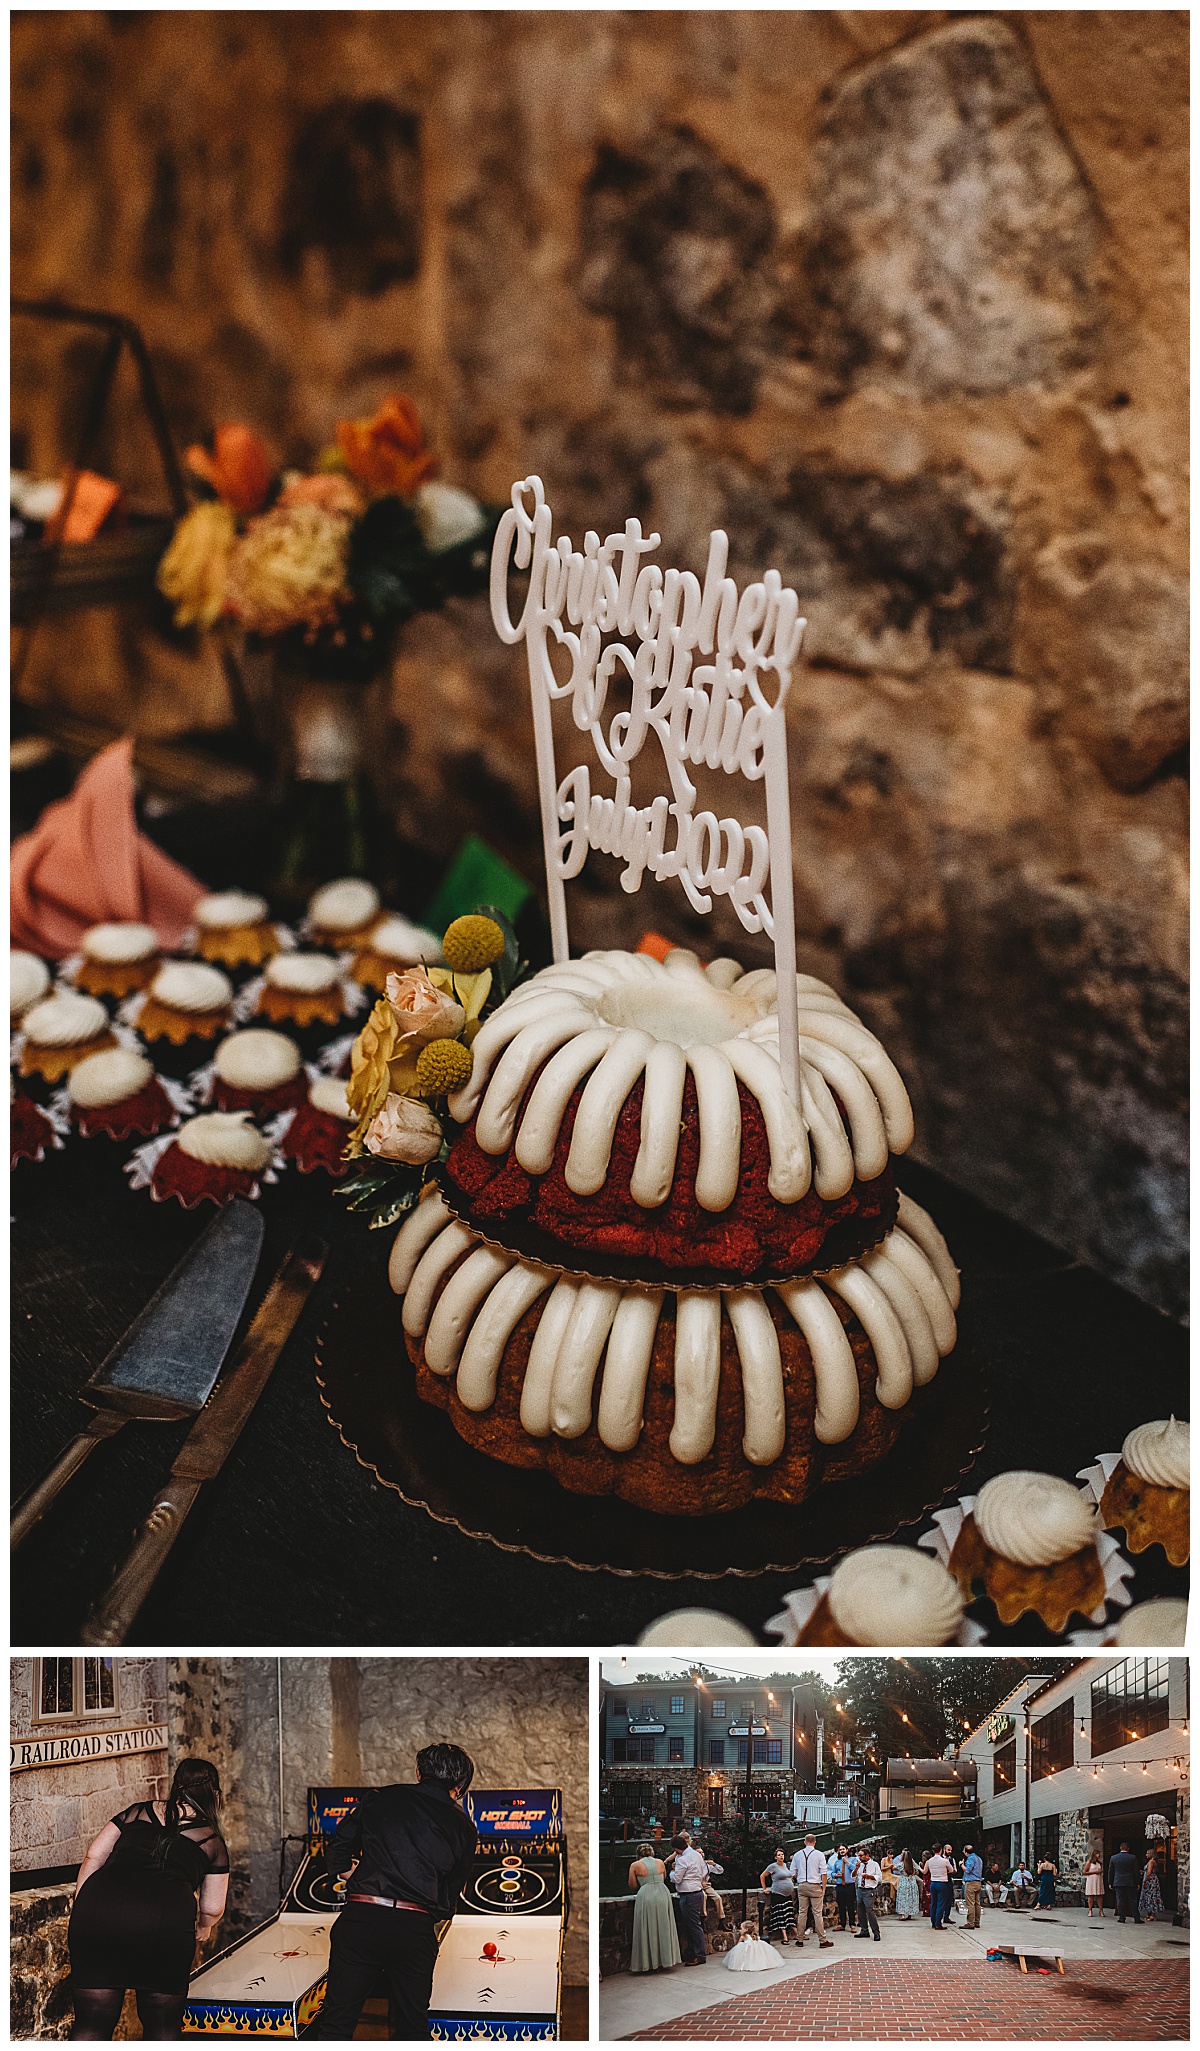 Wedding cake and arcade games for a summer wedding at Mainstreet Ballroom captured by Brittany Dunbar Photography, an Ellicott City Wedding Photographer.